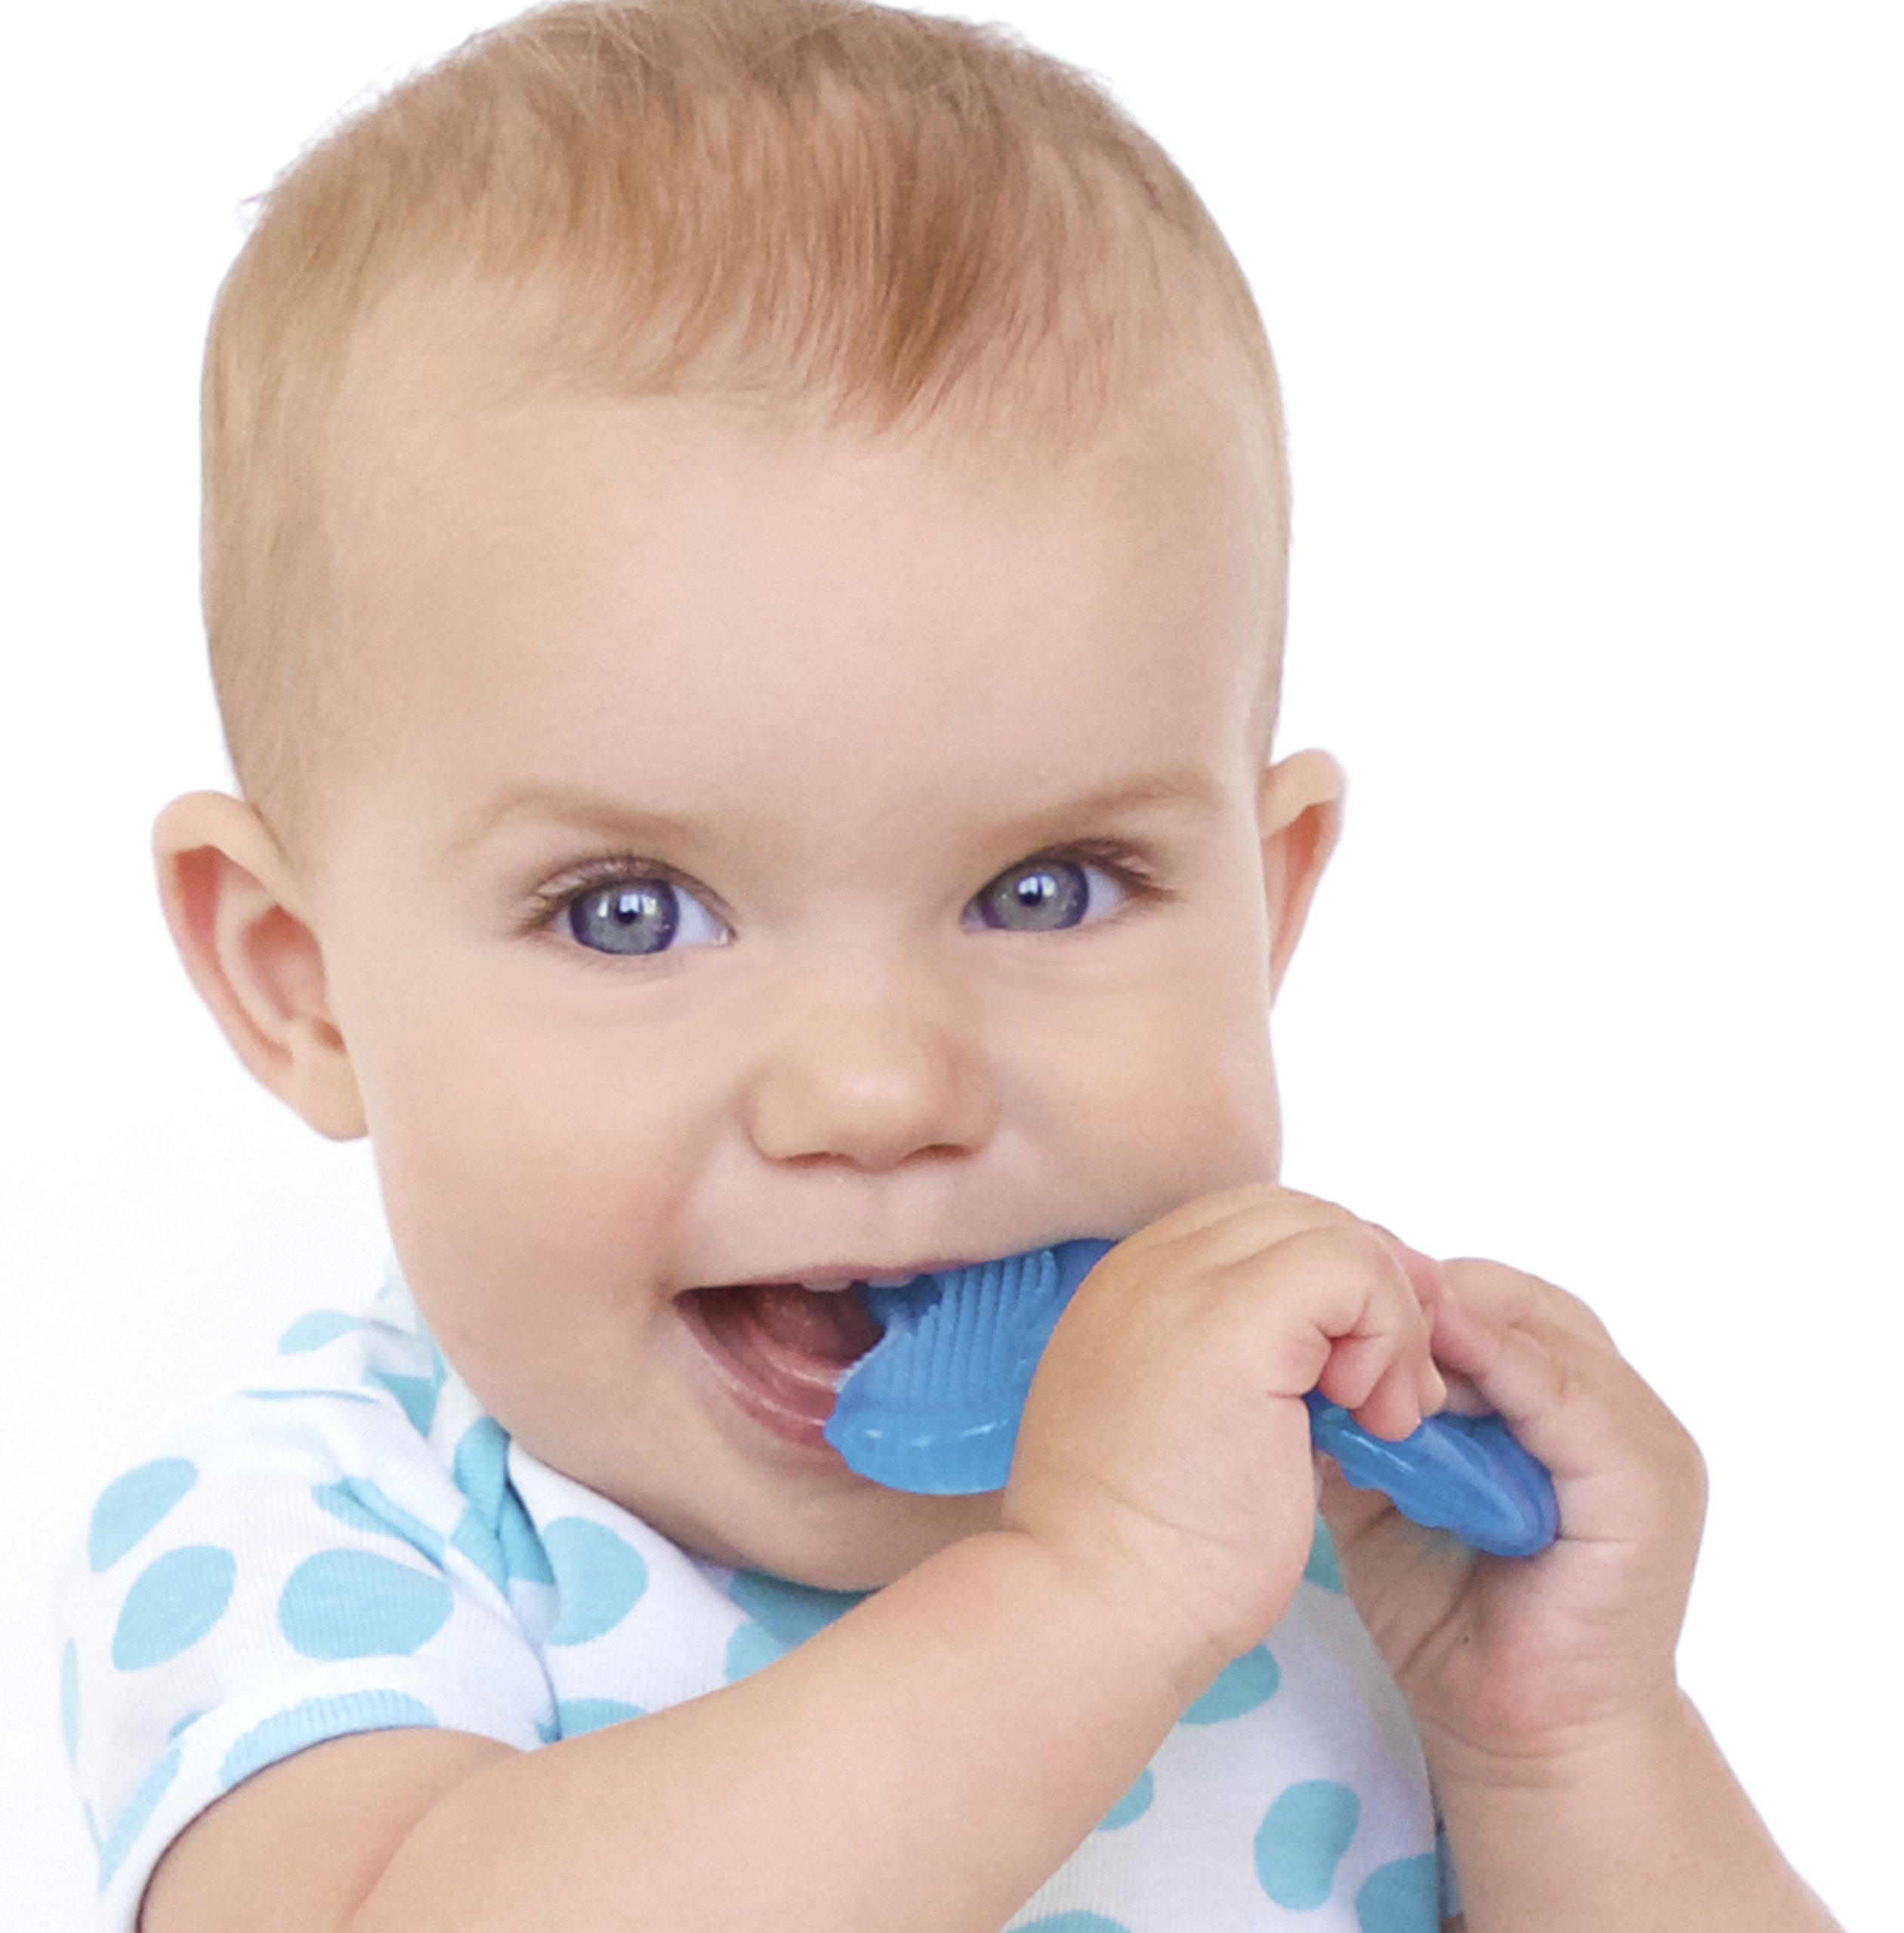 Nuby Silicone Teethe-EEZ Teether with Bristles, Includes Hygienic Case, Blue